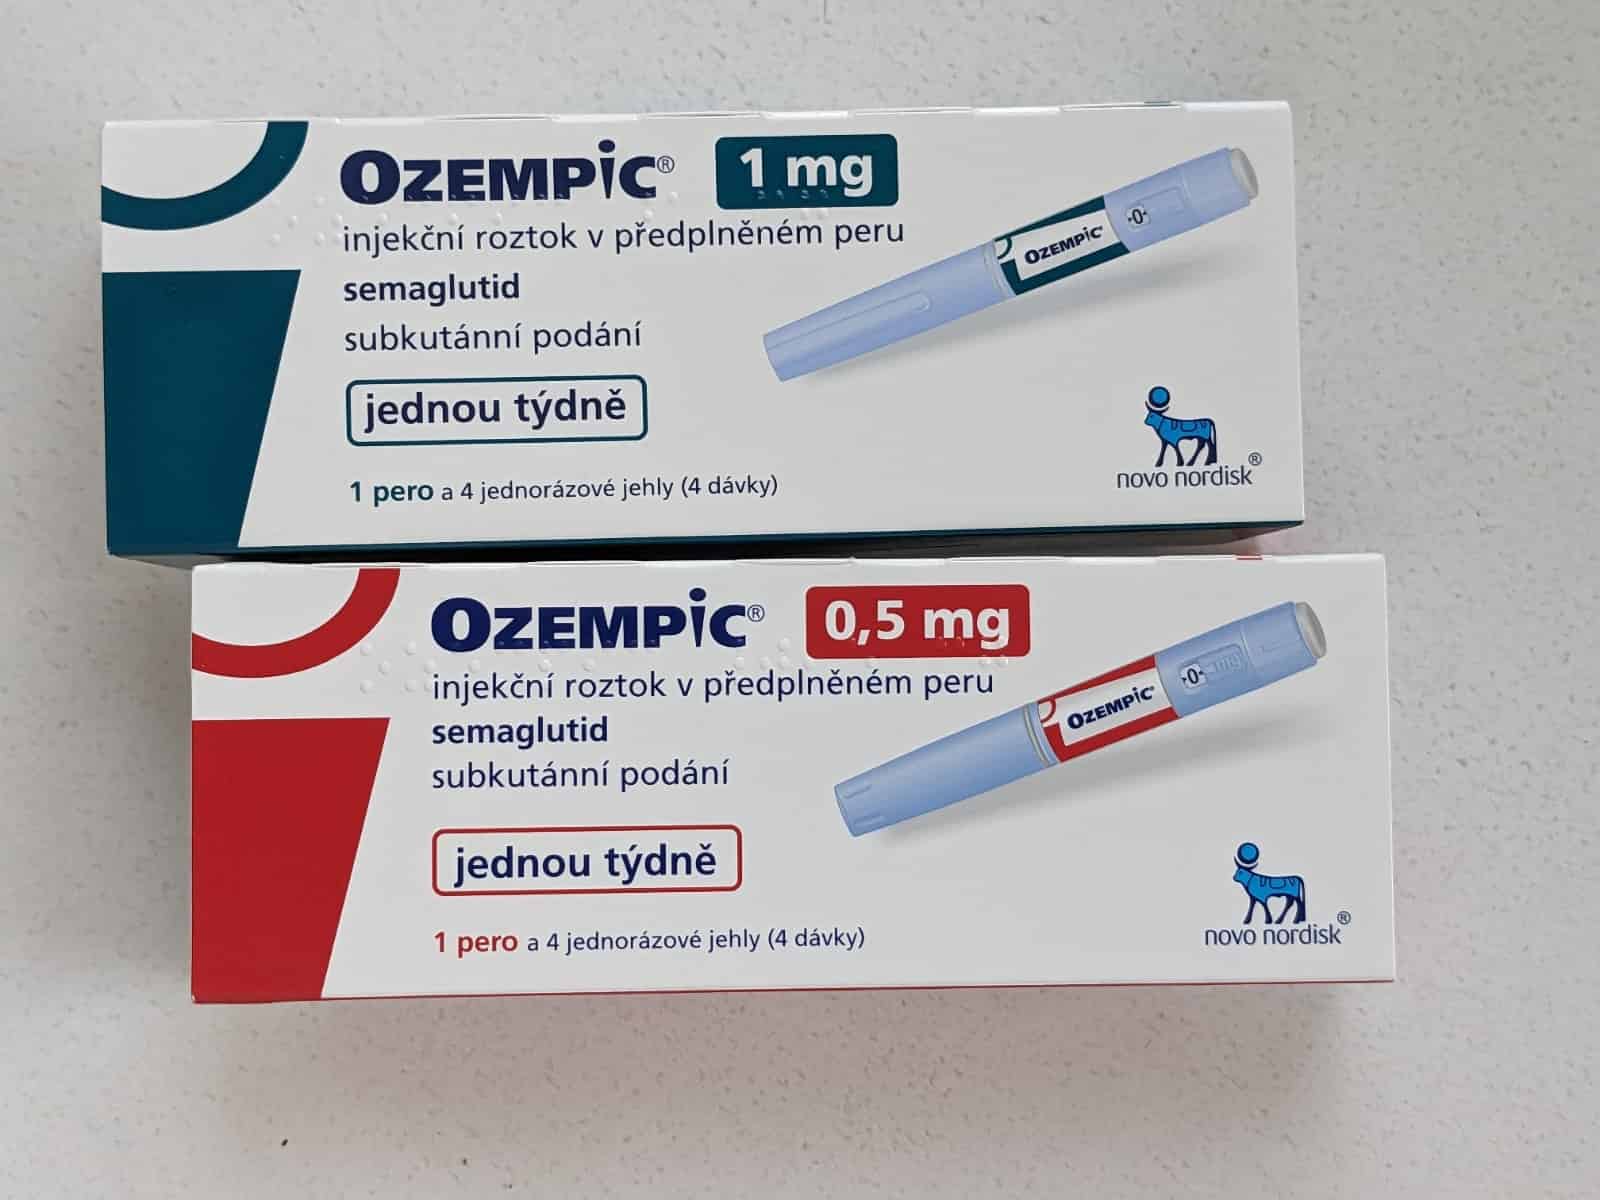 Unraveling ozempic dosing tips for tailoring your dosage